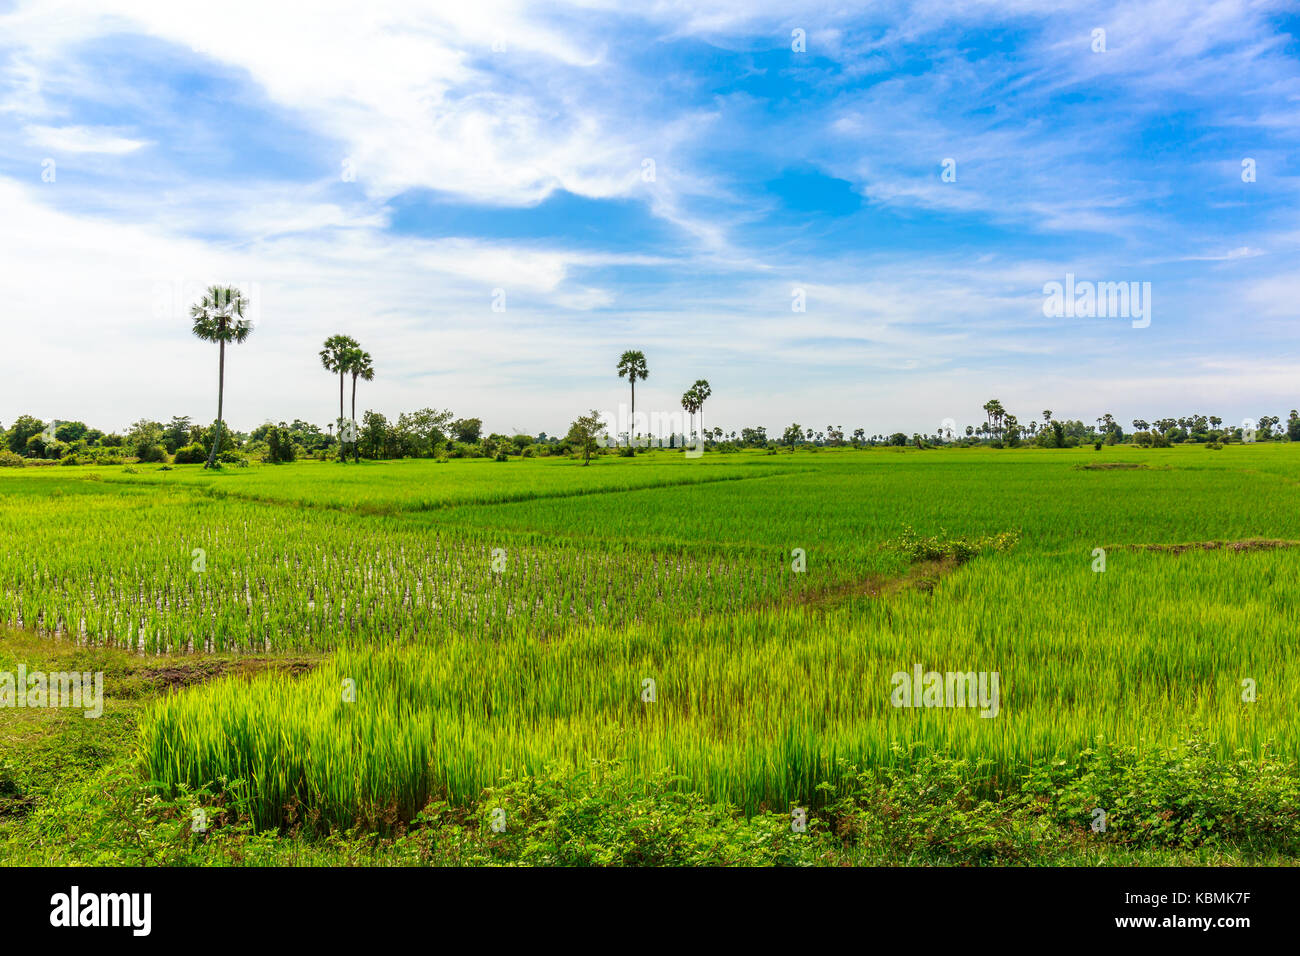 Lovely Day of Beautiful Green Rice Field and Very Nice Blue Sky. Stock Photo